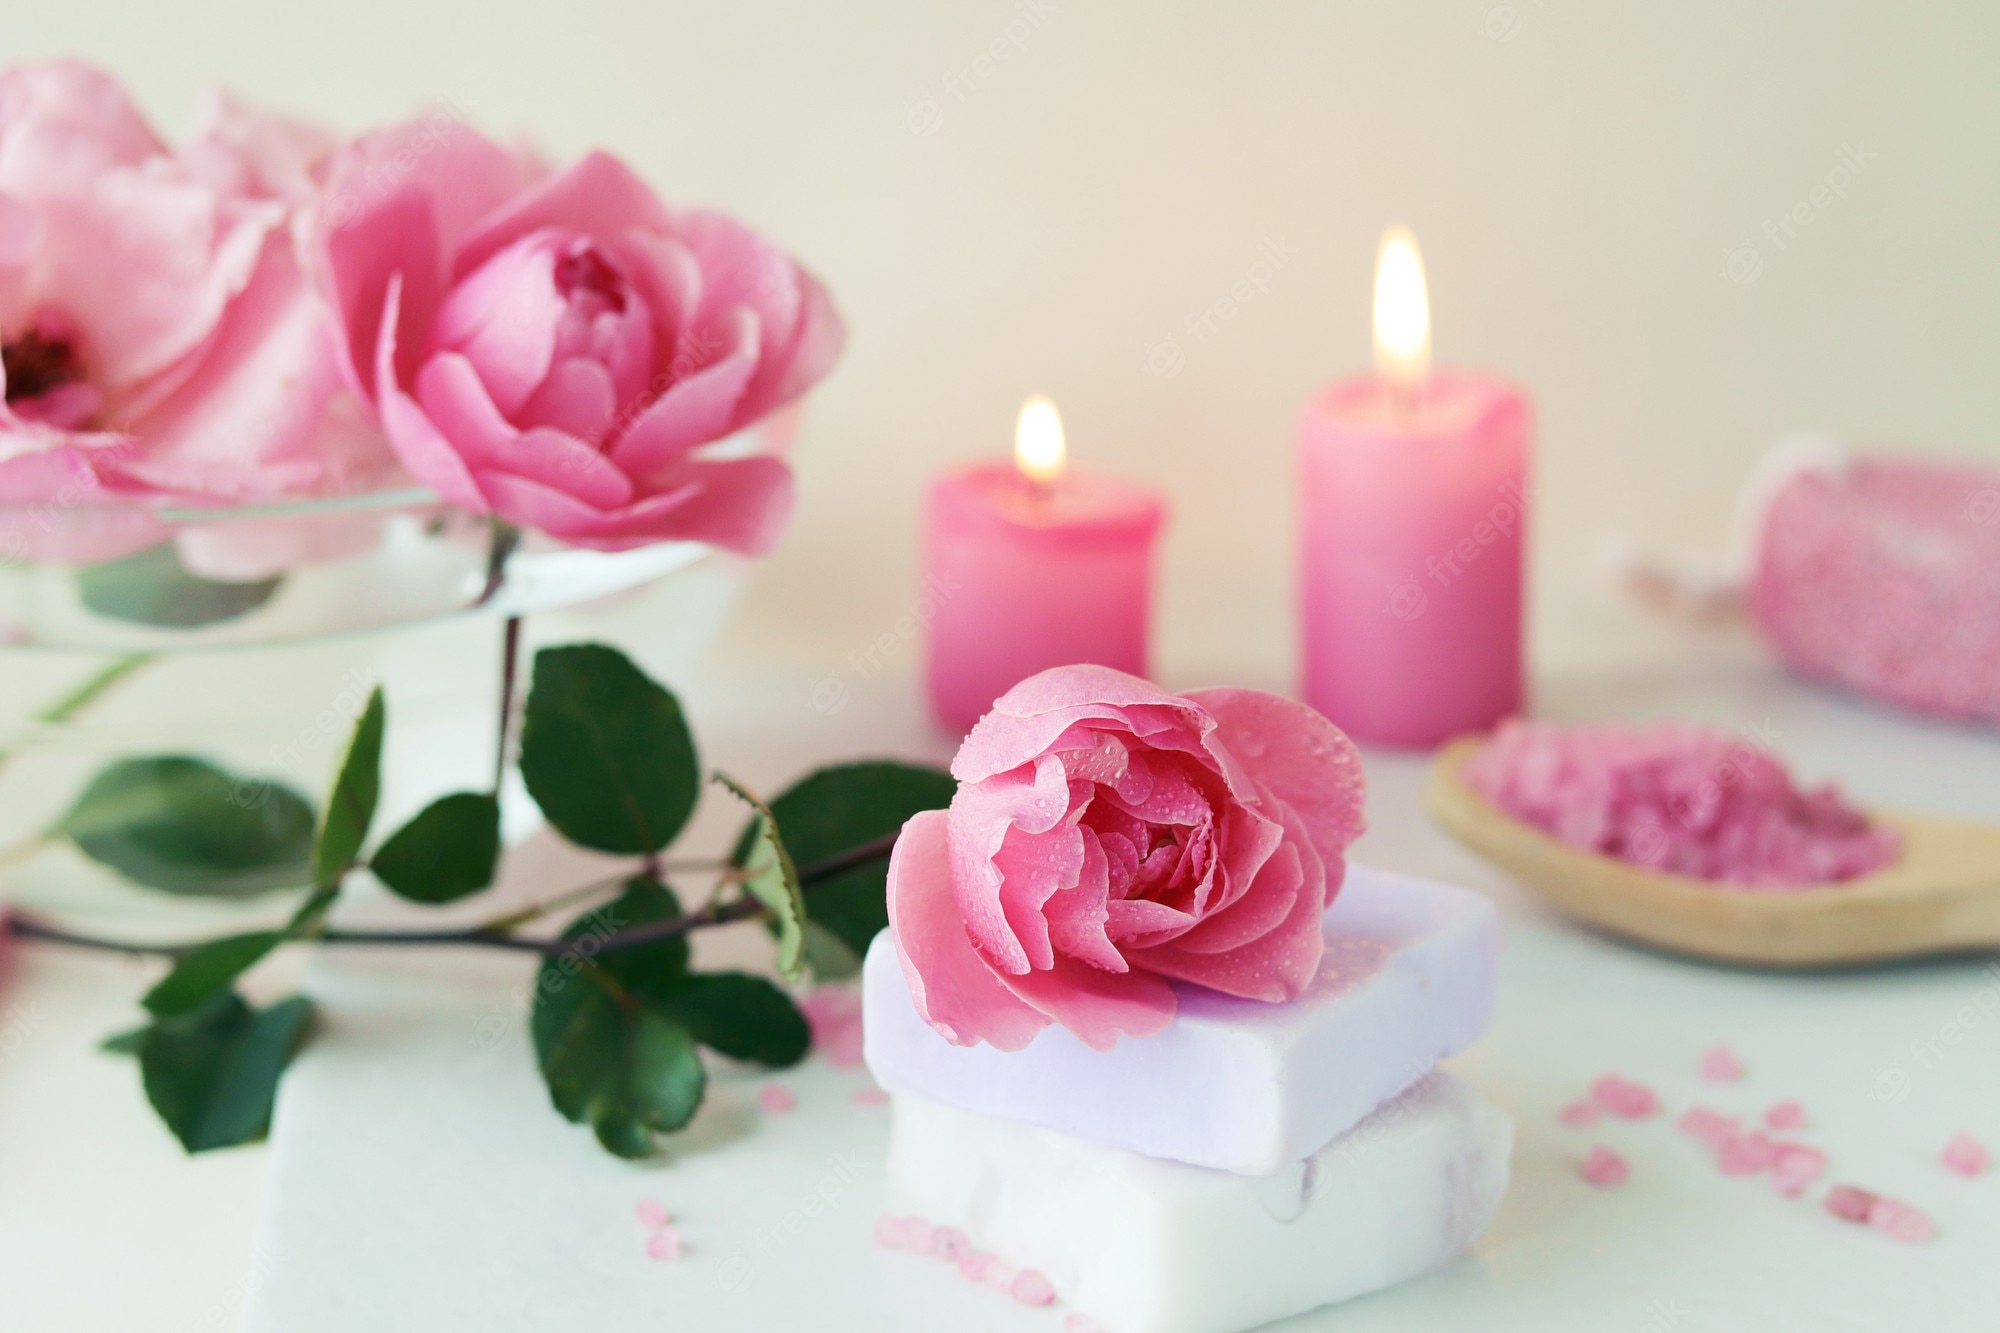 Fragrant Candles Image. Free Vectors, & PSD